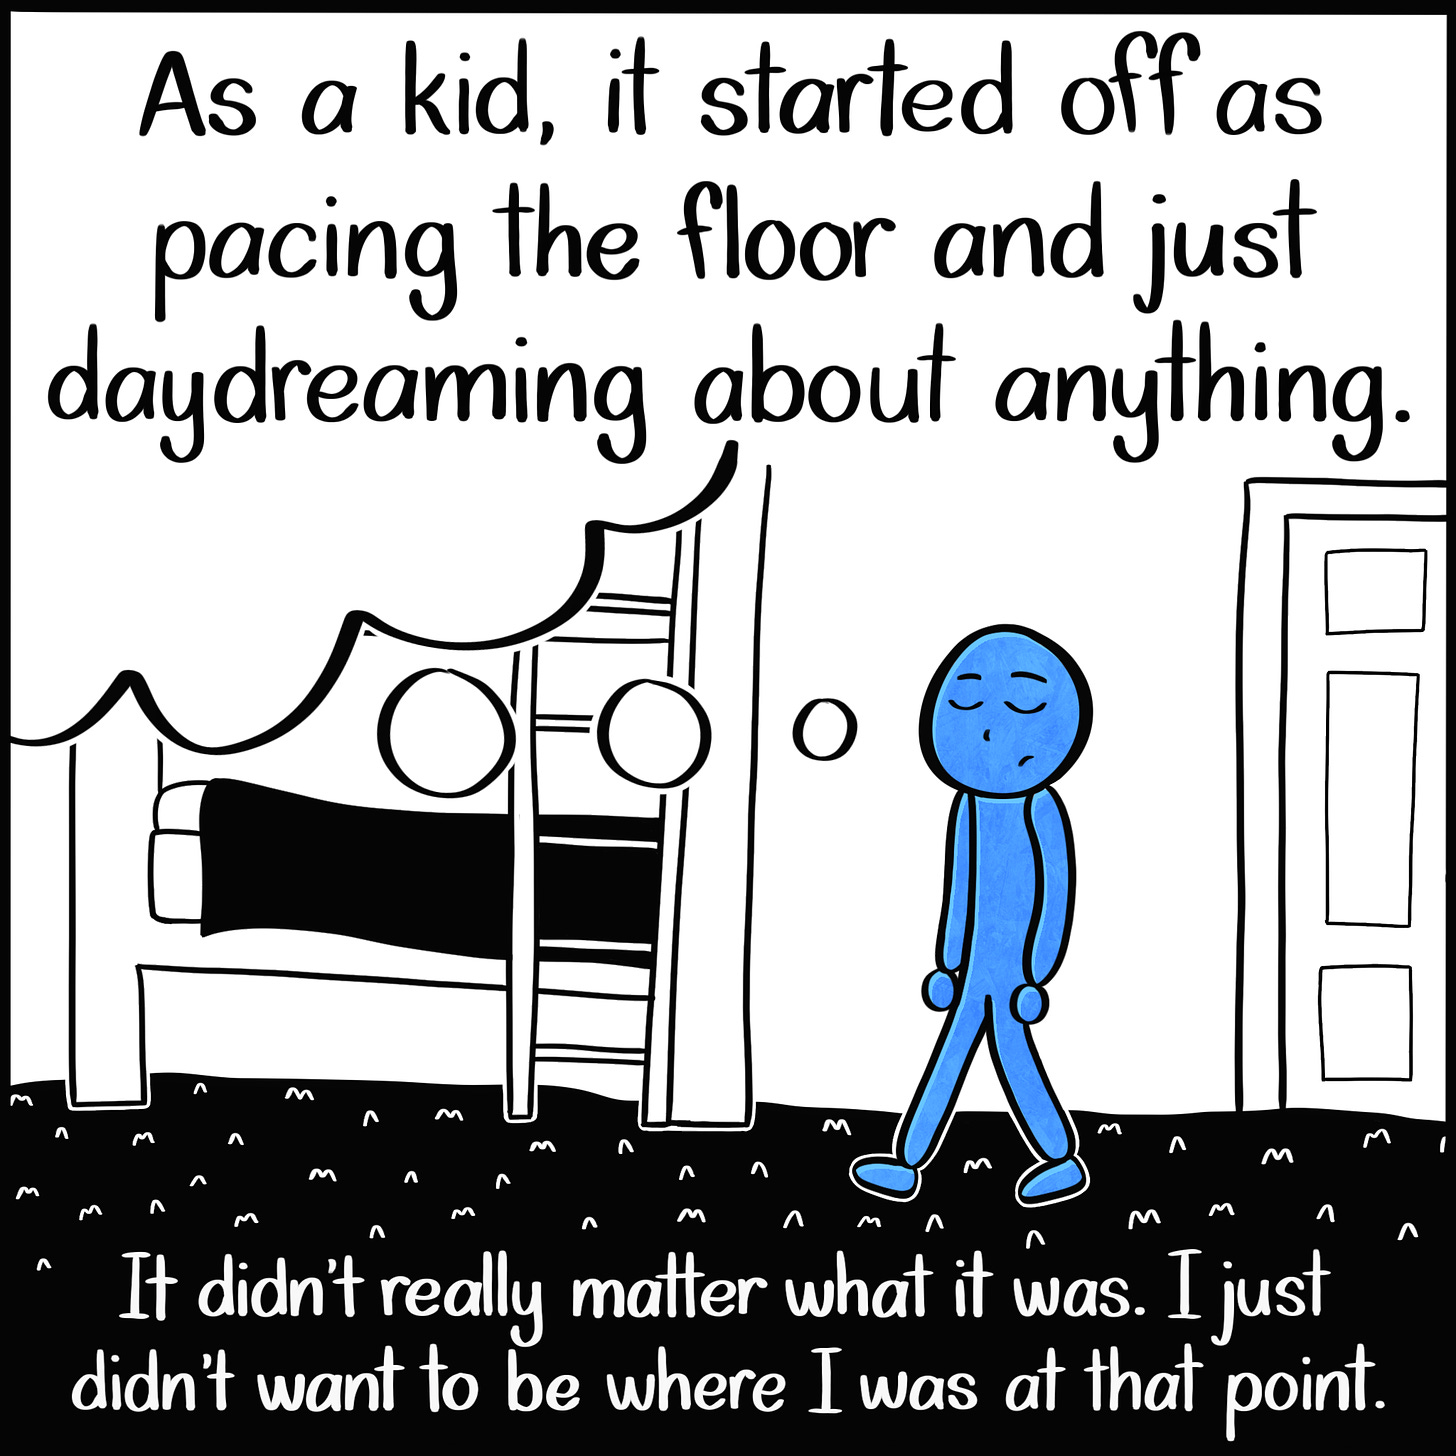 Caption: As a kid, it started off as pacing the floor and just daydreaming about anything. It didn't really matter where I was. I just didn't want to be where I was at that point. Image: A small Blue Person with their eyes closed, pacing a childrens' bedroom with a bunk bed and a dream bubble coming from their head.